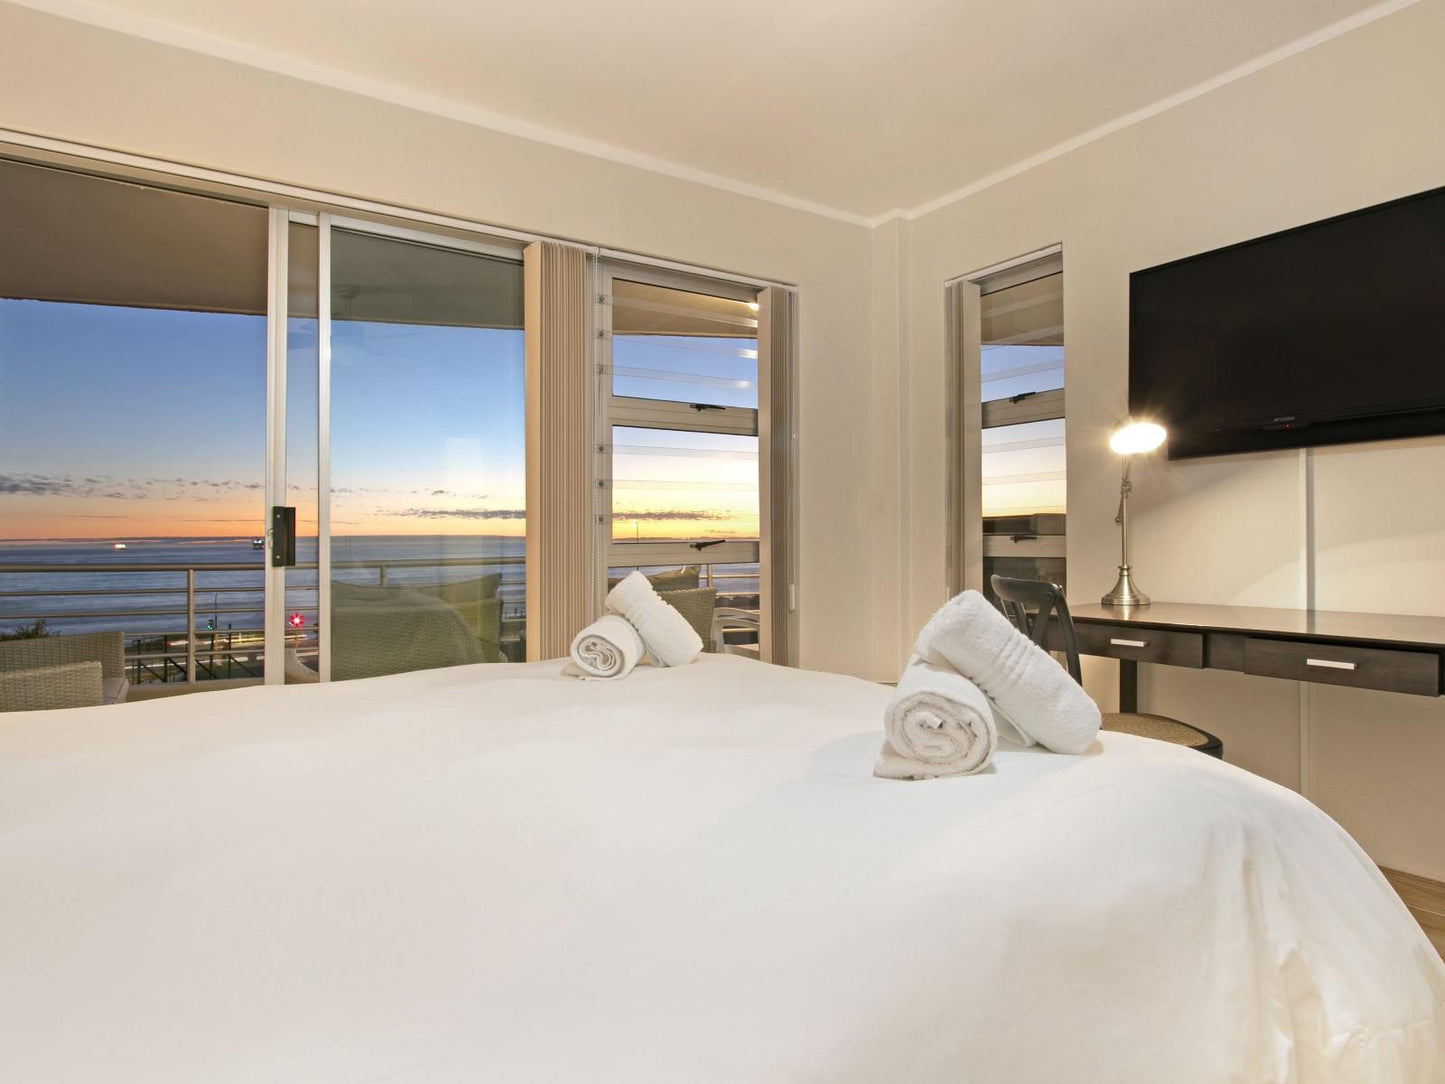 Kite View The Bay By Hostagents West Beach Blouberg Western Cape South Africa Bedroom